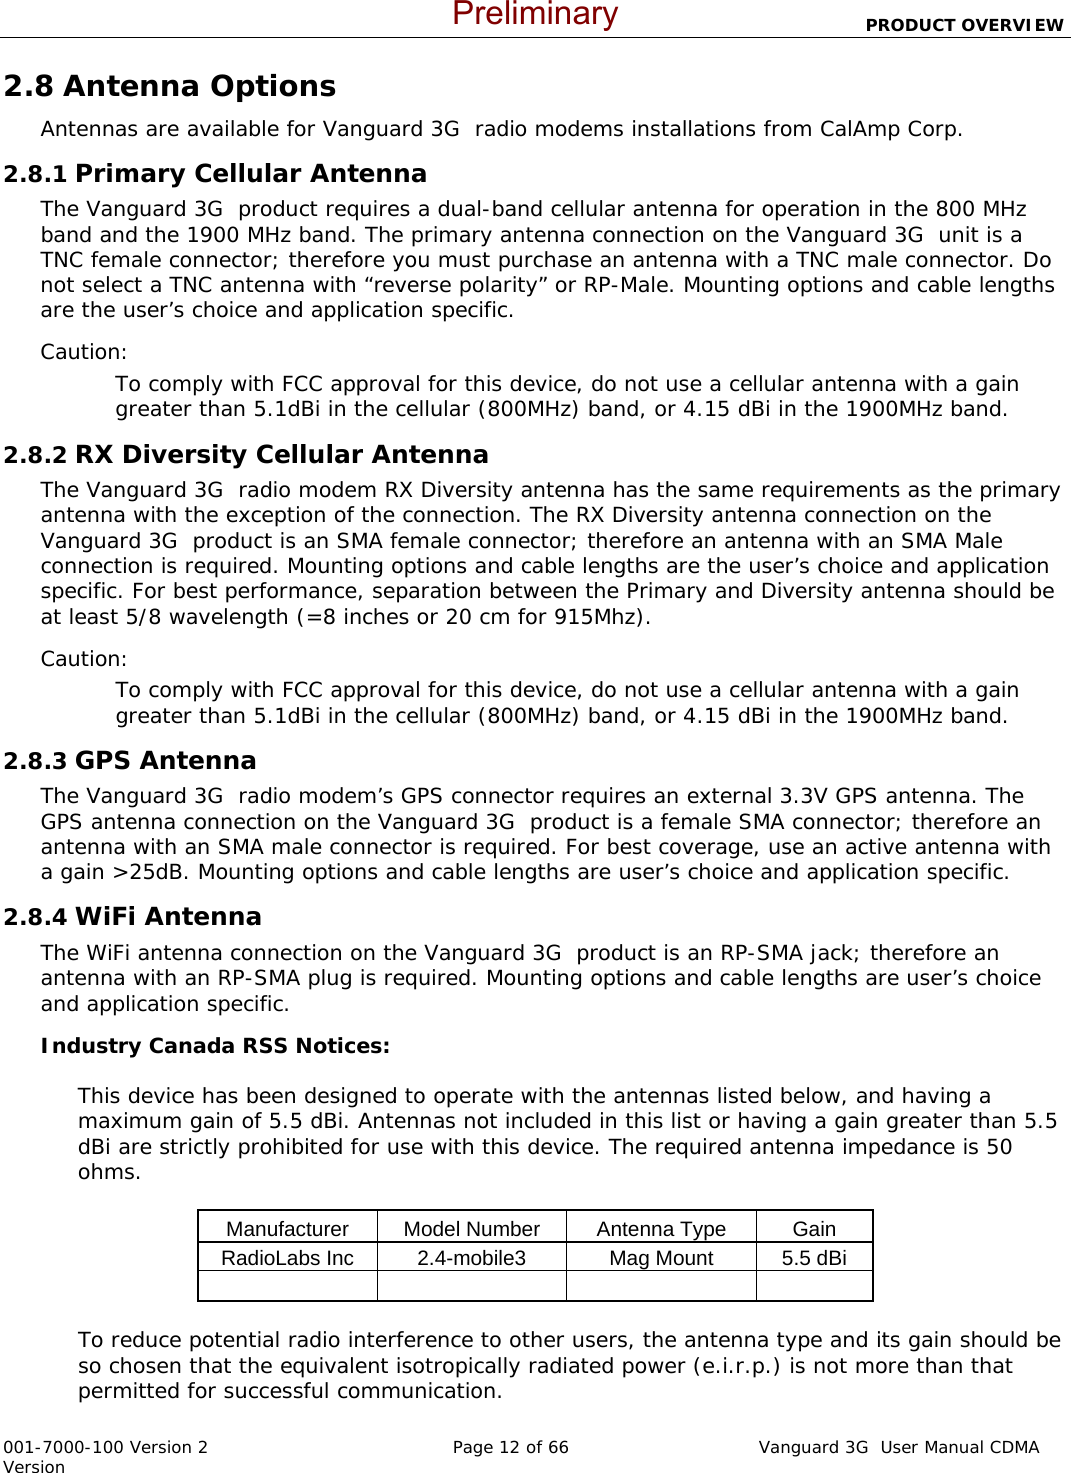                          PRODUCT OVERVIEW  001-7000-100 Version 2       Page 12 of 66       Vanguard 3G  User Manual CDMA Version 2.8 Antenna Options Antennas are available for Vanguard 3G  radio modems installations from CalAmp Corp.  2.8.1 Primary Cellular Antenna The Vanguard 3G  product requires a dual-band cellular antenna for operation in the 800 MHz band and the 1900 MHz band. The primary antenna connection on the Vanguard 3G  unit is a TNC female connector; therefore you must purchase an antenna with a TNC male connector. Do not select a TNC antenna with “reverse polarity” or RP-Male. Mounting options and cable lengths are the user’s choice and application specific. Caution: To comply with FCC approval for this device, do not use a cellular antenna with a gain greater than 5.1dBi in the cellular (800MHz) band, or 4.15 dBi in the 1900MHz band.   2.8.2 RX Diversity Cellular Antenna The Vanguard 3G  radio modem RX Diversity antenna has the same requirements as the primary antenna with the exception of the connection. The RX Diversity antenna connection on the Vanguard 3G  product is an SMA female connector; therefore an antenna with an SMA Male connection is required. Mounting options and cable lengths are the user’s choice and application specific. For best performance, separation between the Primary and Diversity antenna should be at least 5/8 wavelength (=8 inches or 20 cm for 915Mhz).   Caution: To comply with FCC approval for this device, do not use a cellular antenna with a gain greater than 5.1dBi in the cellular (800MHz) band, or 4.15 dBi in the 1900MHz band.   2.8.3 GPS Antenna The Vanguard 3G  radio modem’s GPS connector requires an external 3.3V GPS antenna. The GPS antenna connection on the Vanguard 3G  product is a female SMA connector; therefore an antenna with an SMA male connector is required. For best coverage, use an active antenna with a gain &gt;25dB. Mounting options and cable lengths are user’s choice and application specific. 2.8.4 WiFi Antenna The WiFi antenna connection on the Vanguard 3G  product is an RP-SMA jack; therefore an antenna with an RP-SMA plug is required. Mounting options and cable lengths are user’s choice and application specific. Industry Canada RSS Notices:   This device has been designed to operate with the antennas listed below, and having a maximum gain of 5.5 dBi. Antennas not included in this list or having a gain greater than 5.5 dBi are strictly prohibited for use with this device. The required antenna impedance is 50 ohms.  Manufacturer  Model Number  Antenna Type   Gain RadioLabs Inc  2.4-mobile3  Mag Mount  5.5 dBi             To reduce potential radio interference to other users, the antenna type and its gain should be so chosen that the equivalent isotropically radiated power (e.i.r.p.) is not more than that permitted for successful communication.  Preliminary